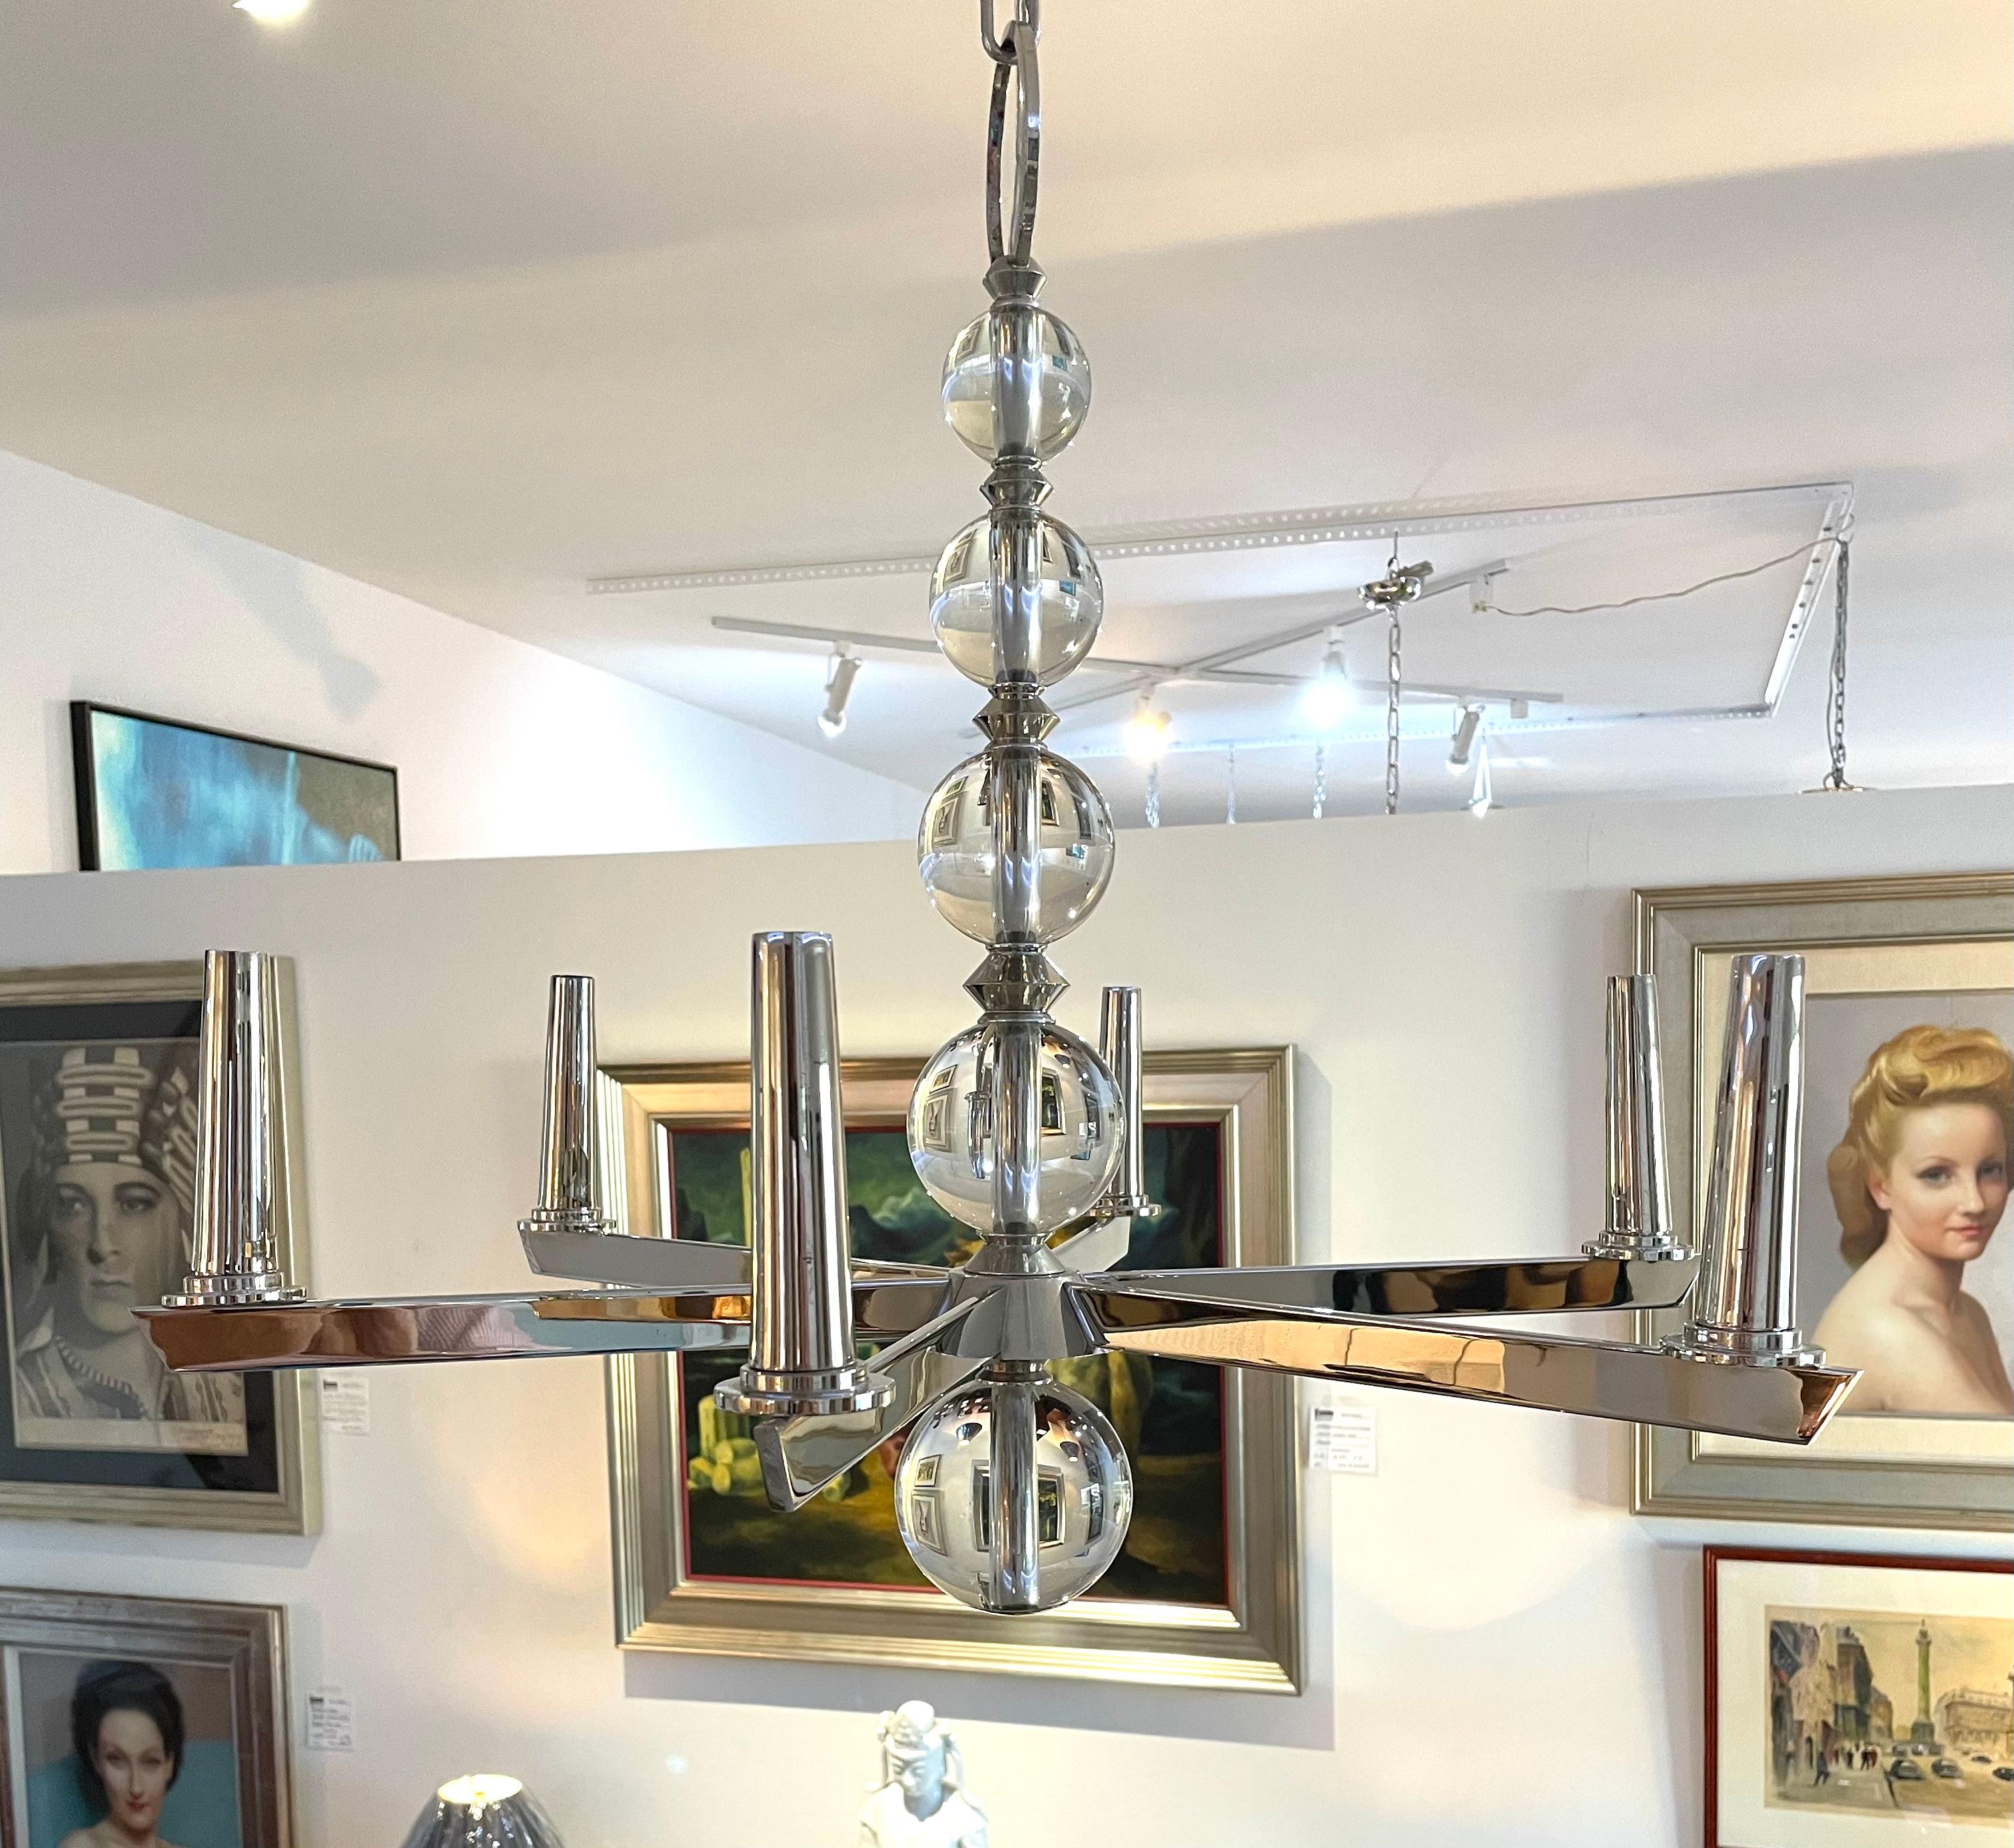 This stylish and chic Art Deco style chandelier will make a statement with its form and use of materials. The nickel plating compliments the crystal spheres beautifully. 

Note: Overall height including the chain and canopy is 49.50